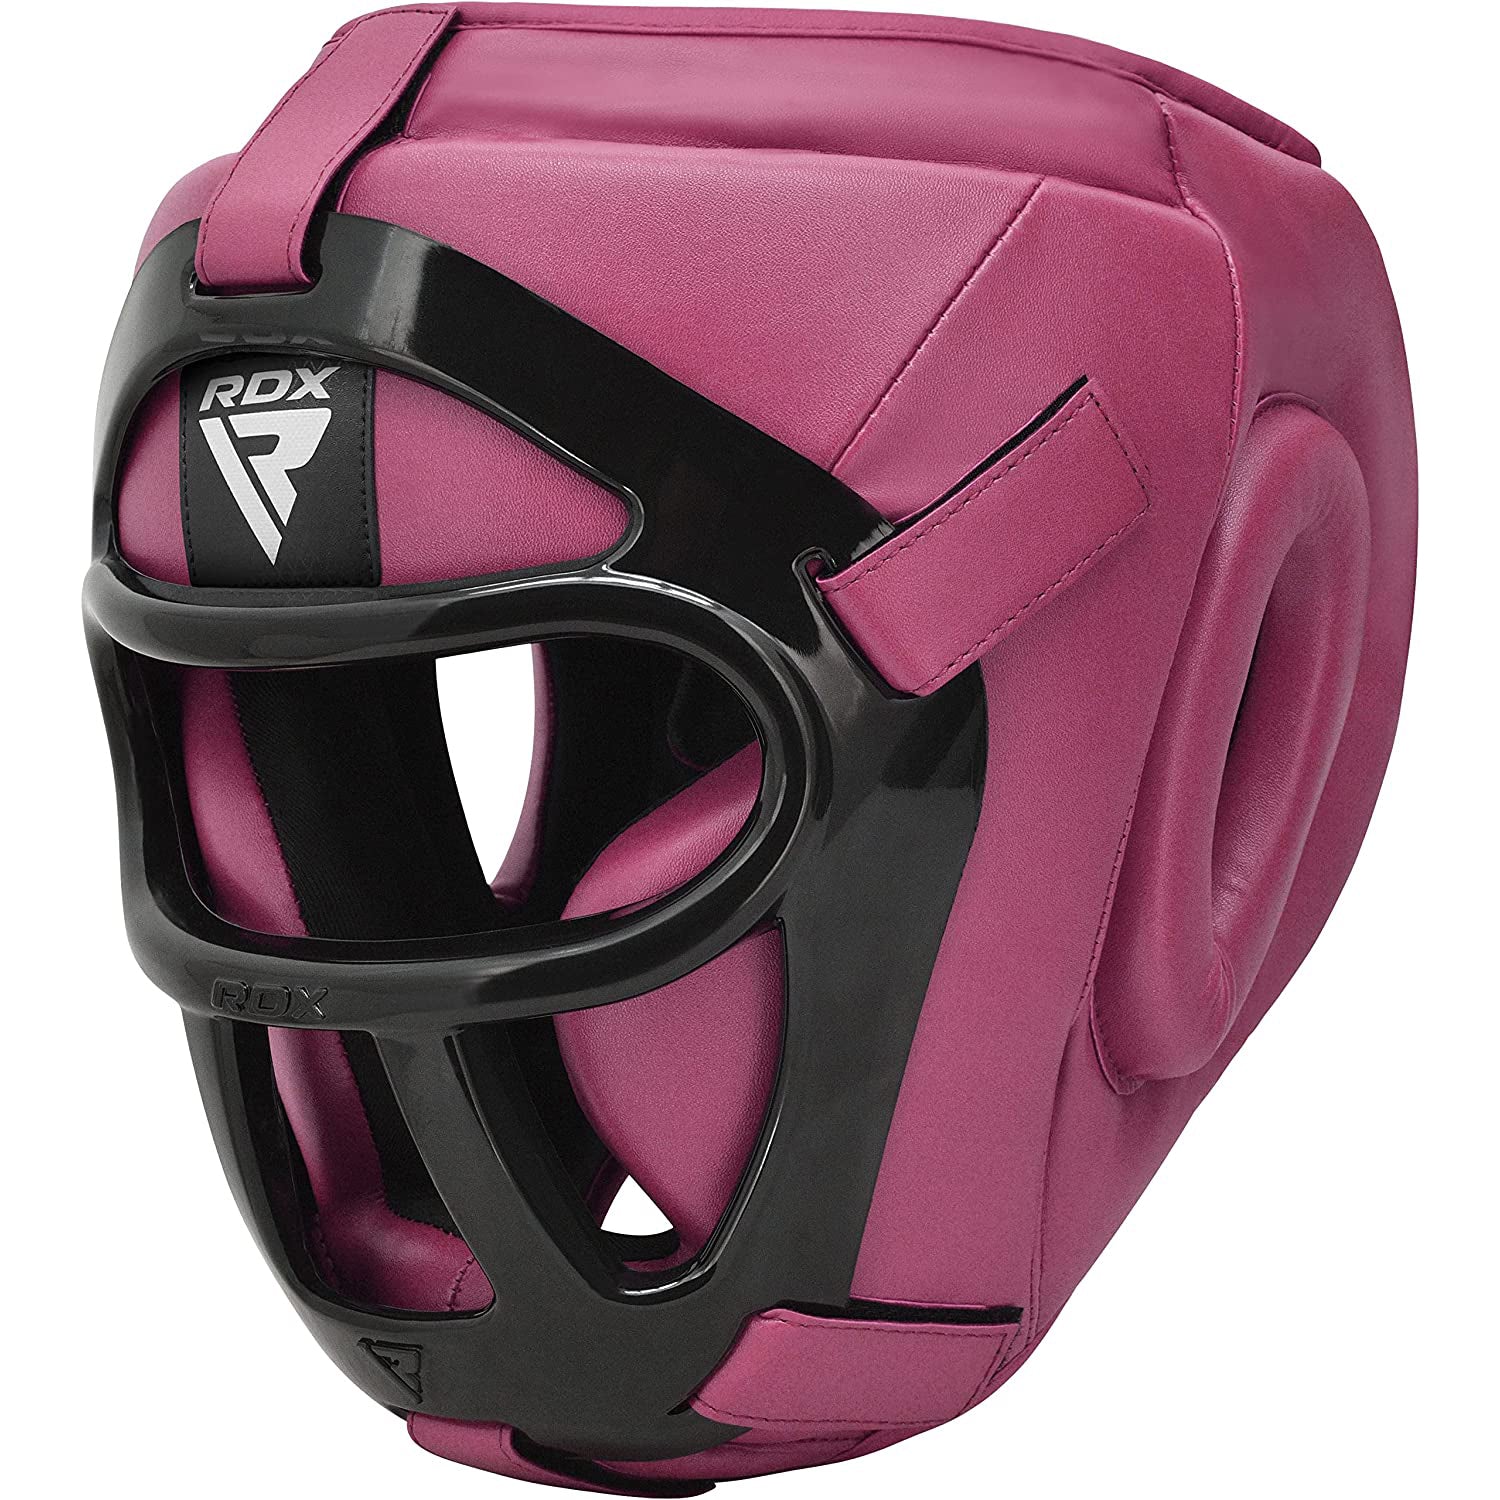 RDX T1 Full Face Protection Headgear for Boxing, MMA, BJJ, Muay Thai, Kickboxing - PINK - EXTRA LARGE - Pro-Distributing